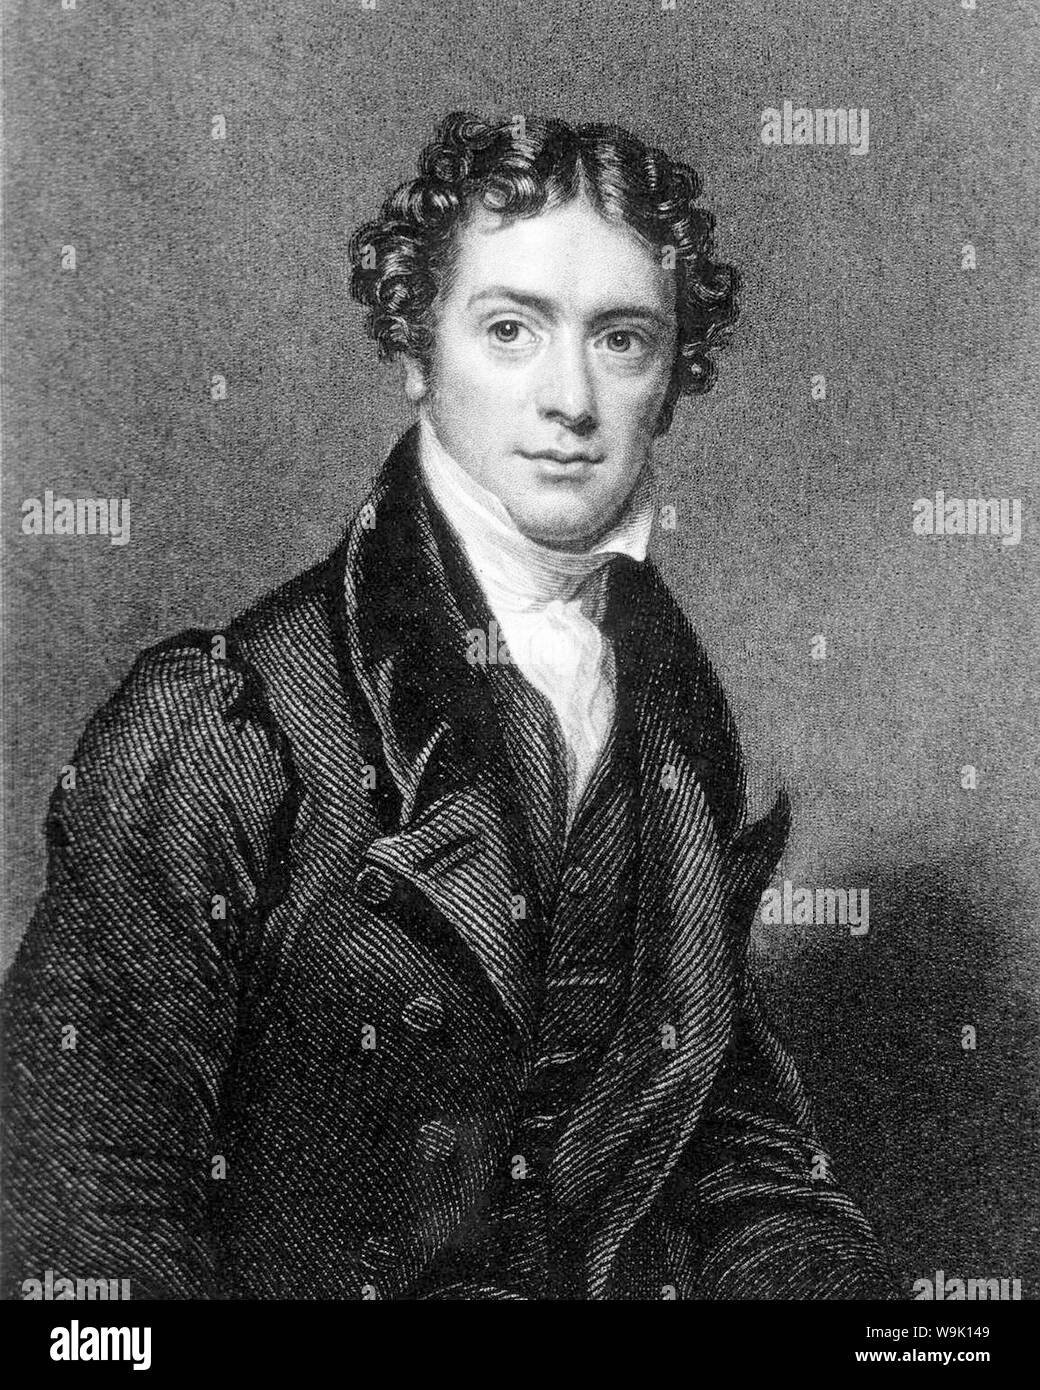 Michael Faraday (1791–1867), in his late thirties, portrait engraving, circa 1829 Stock Photo